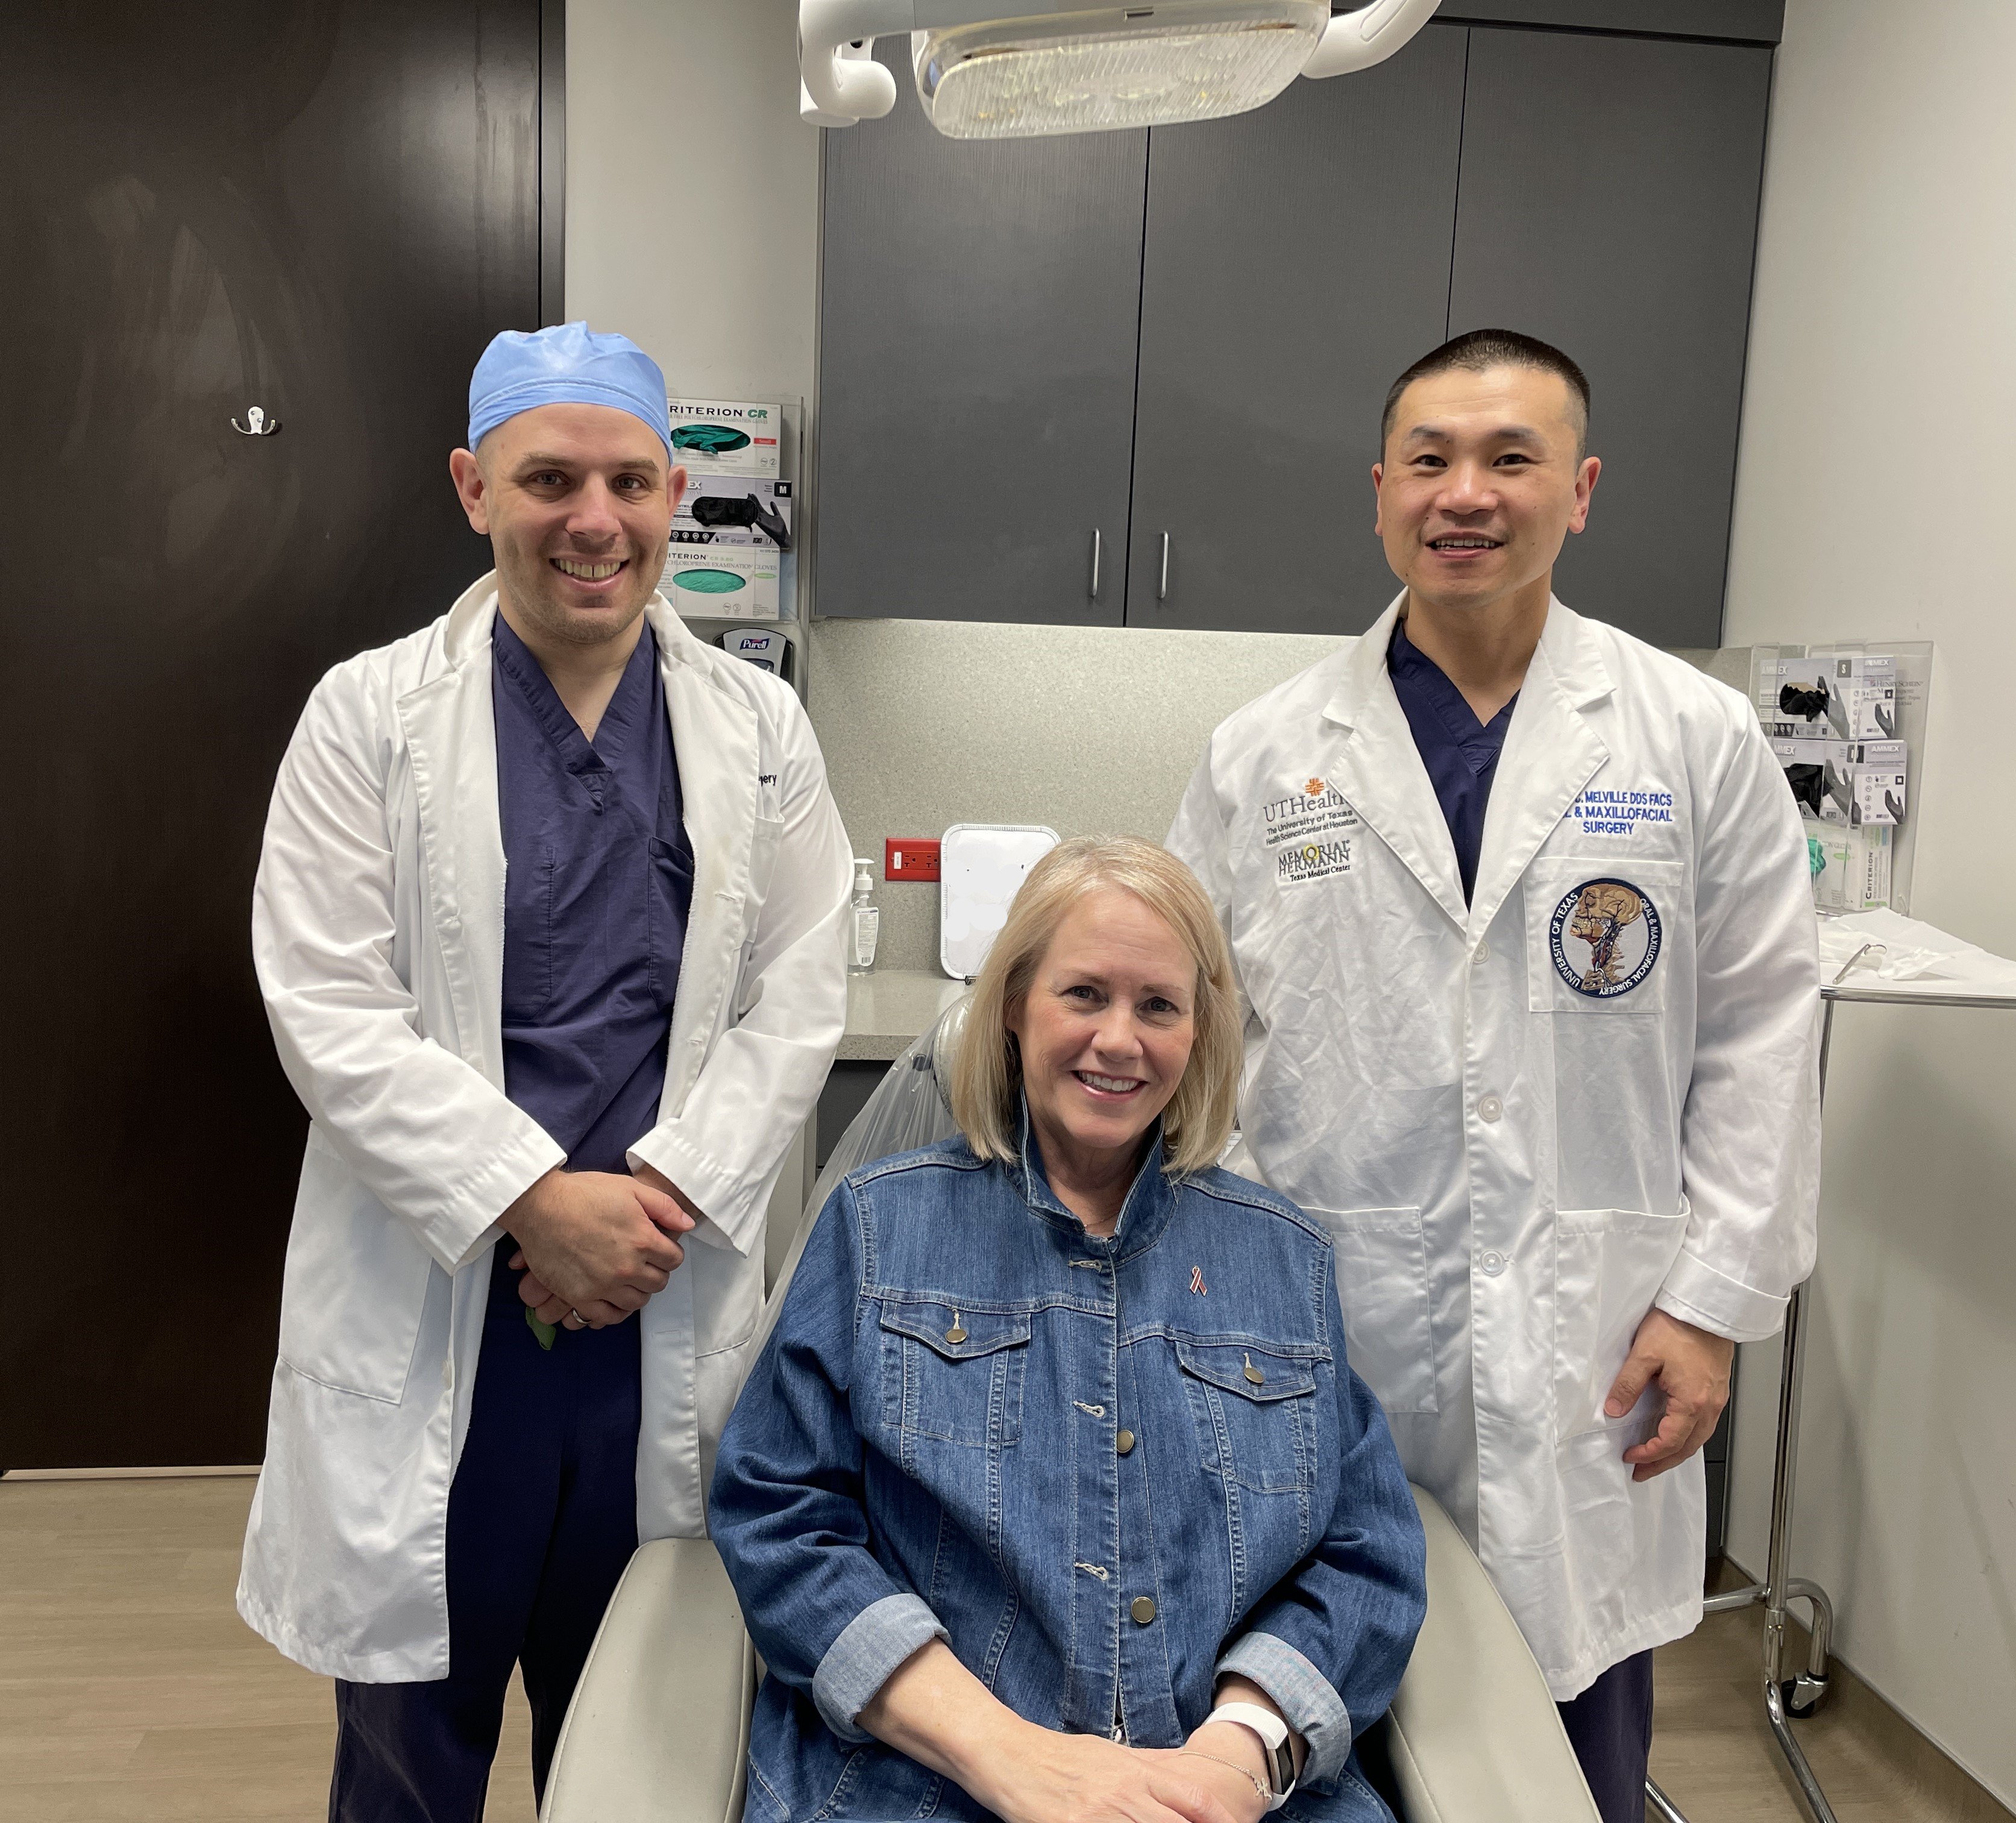 Linda Pellerito, center, is now cancer-free thanks to surgery by James Melville, DDS, right, and the care of Scott Manis, DDS, MD, left, and encourages people to have regular dental checkups. (Photo by UTHealth Houston)